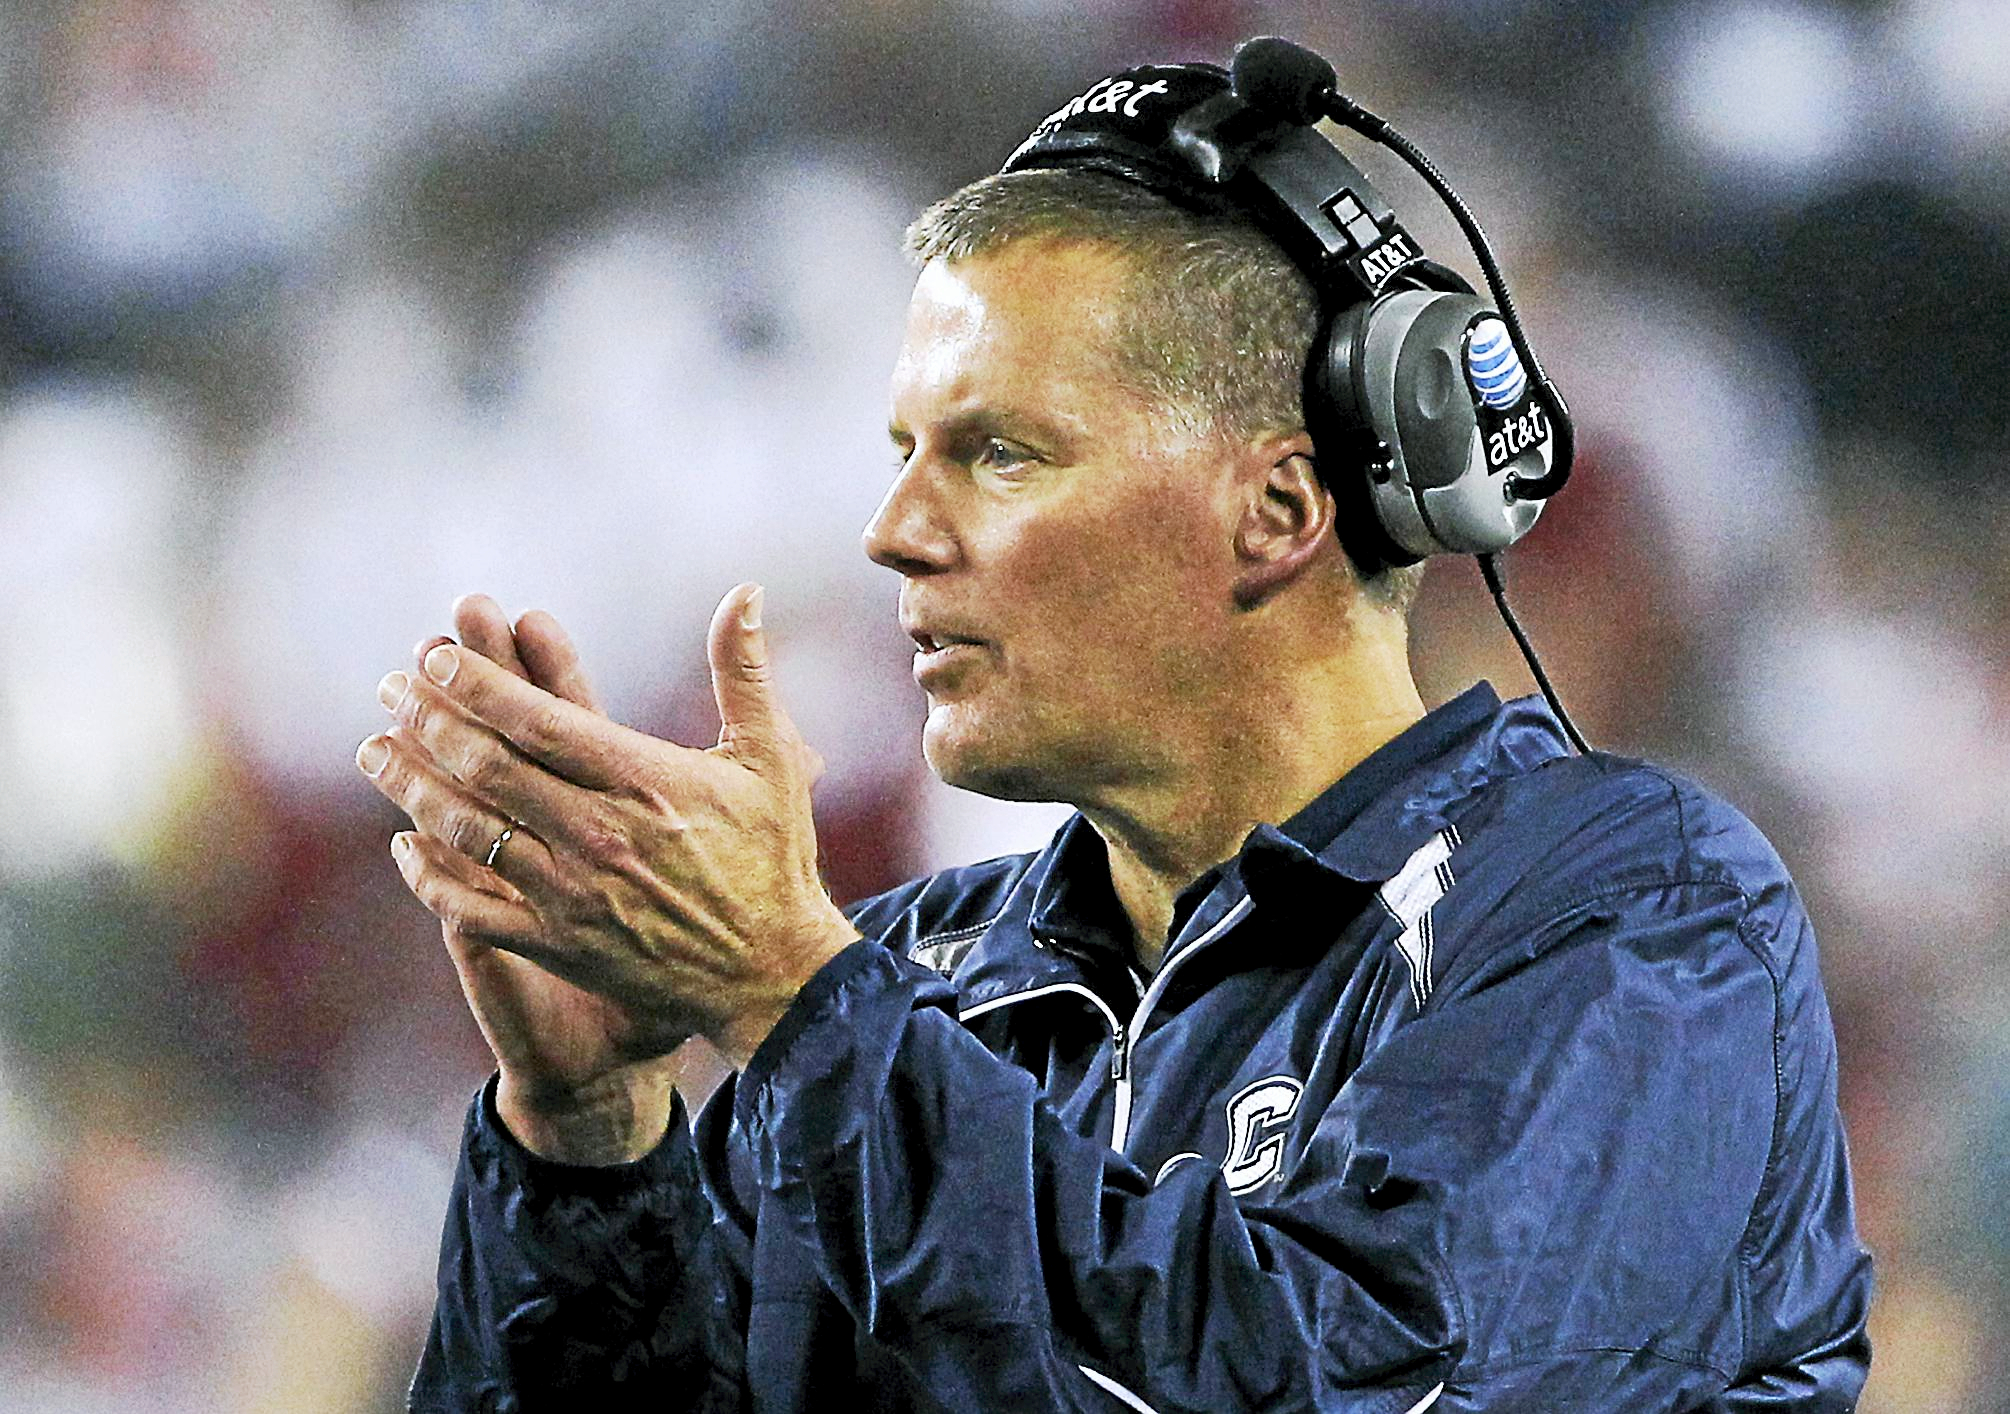 UConn and Edsall father-and-son football coaches appeal ethics decision